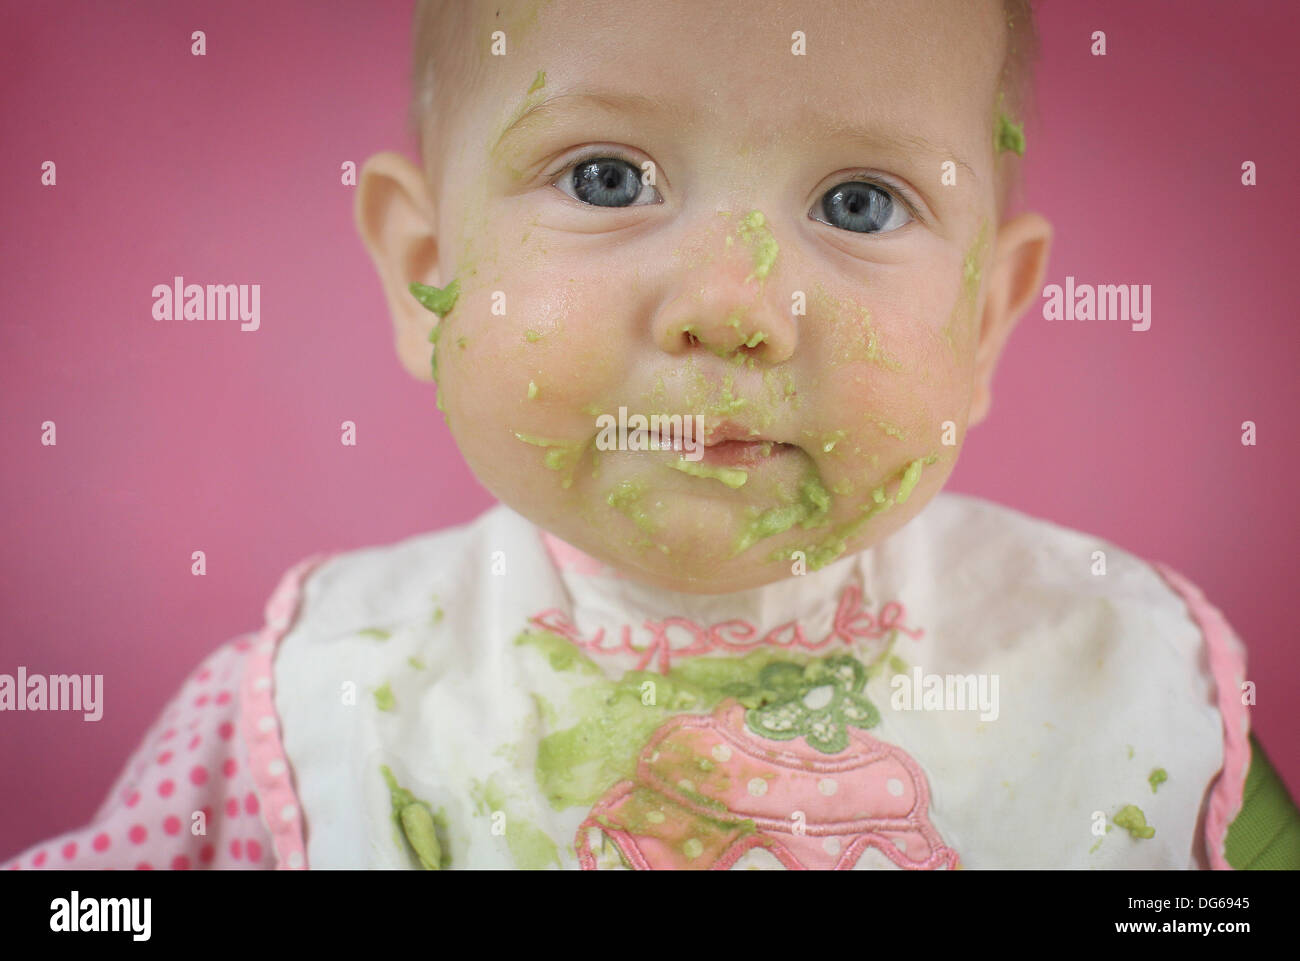 Baby girl sat in a high hi chair eating avocado Stock Photo